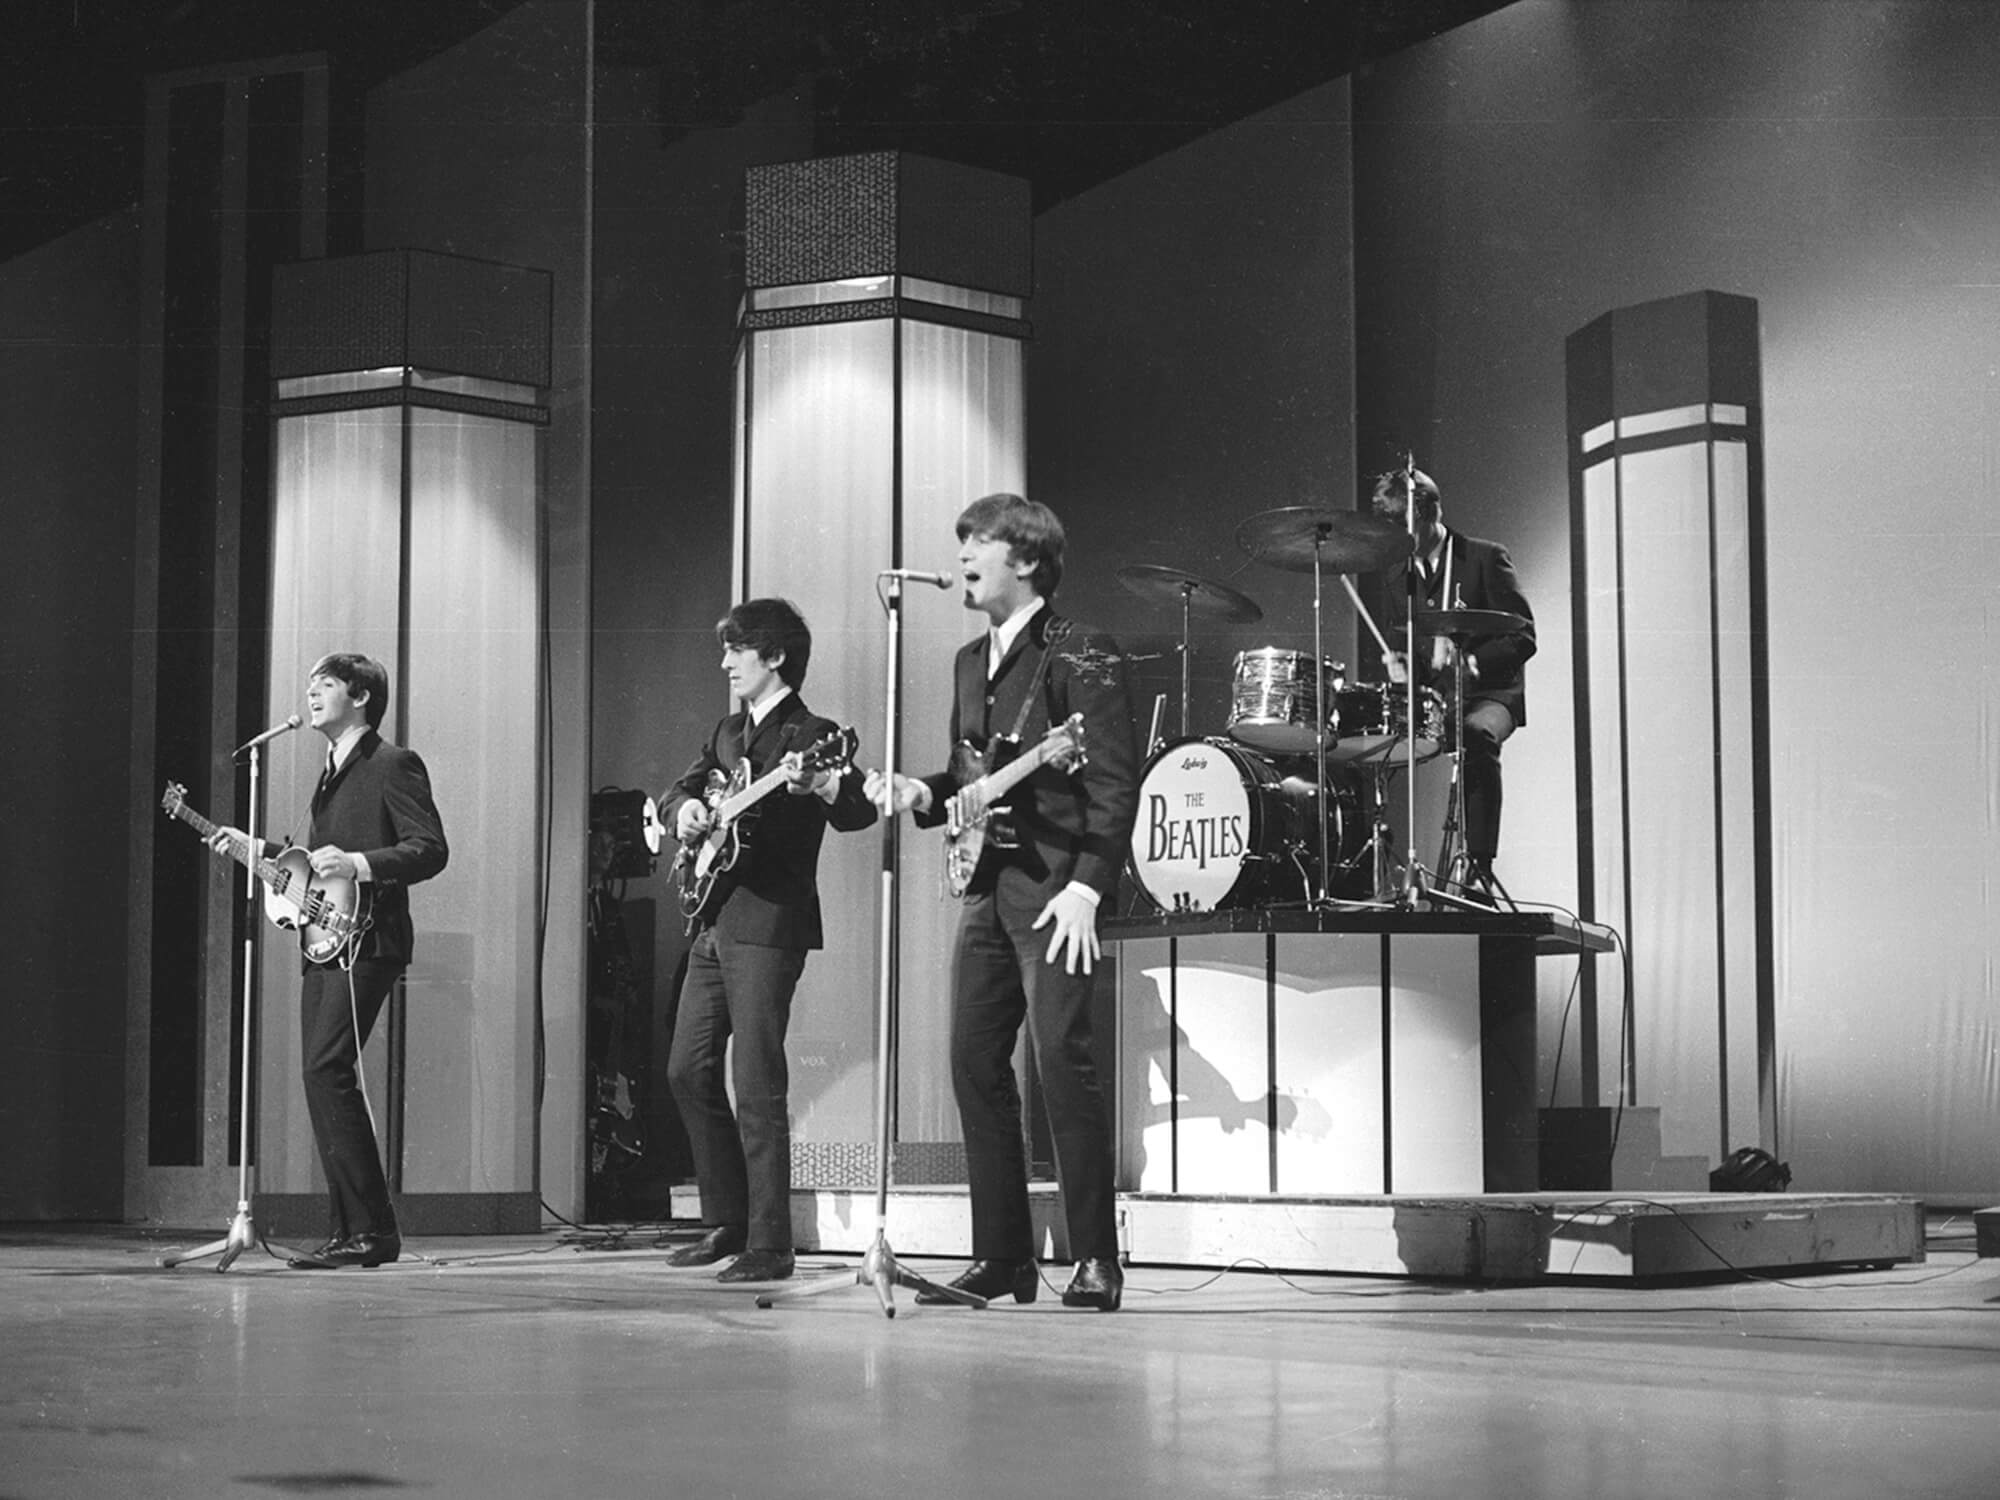 The Beatles performing in 1965, photo by Les Lee/Express via Getty Images